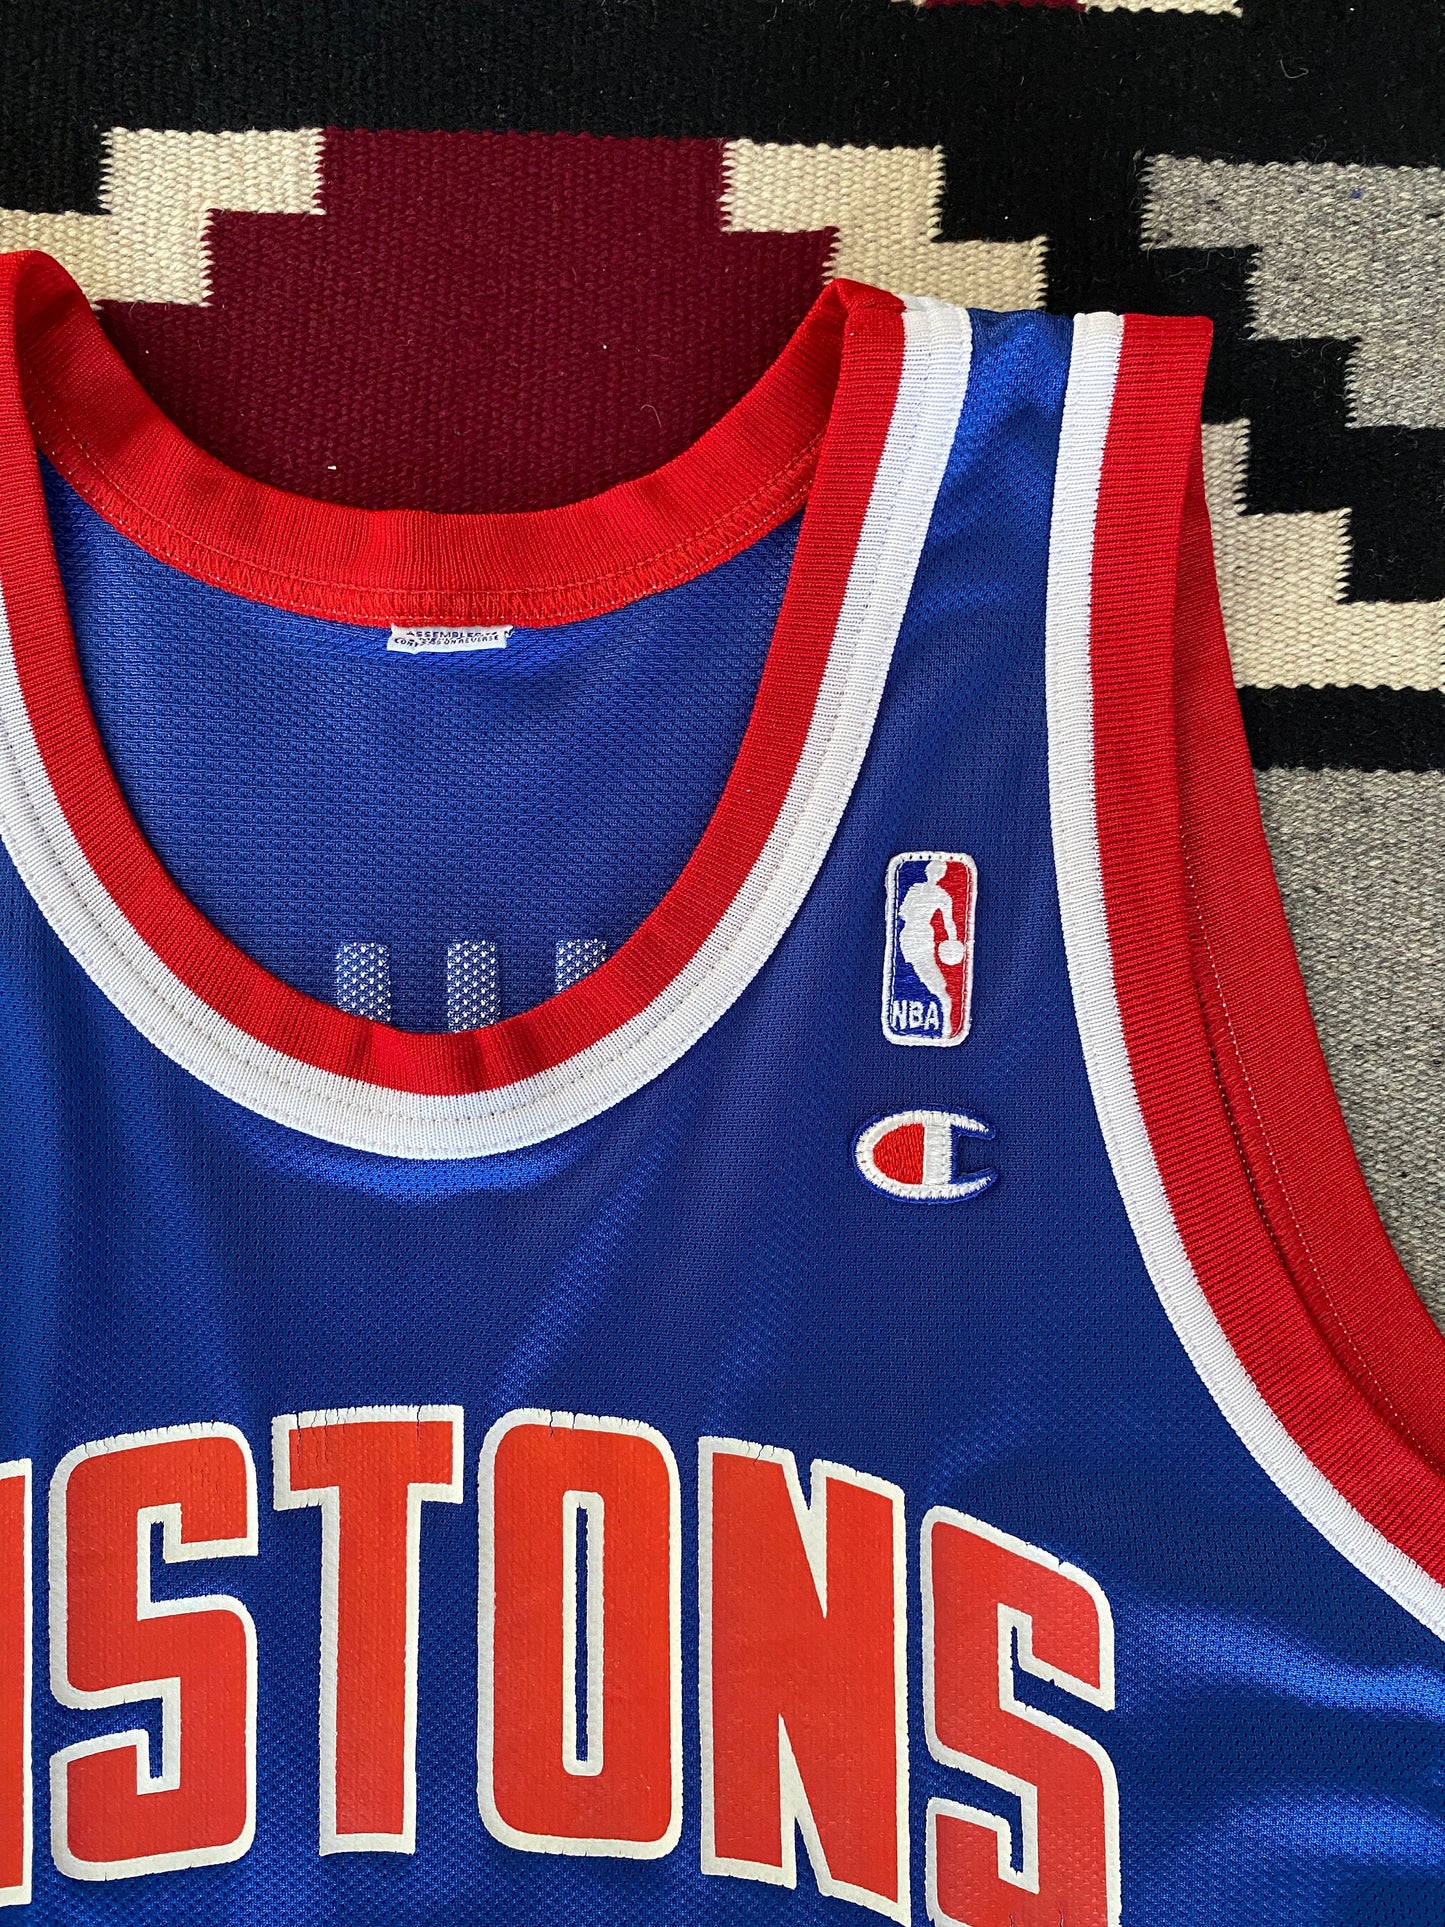 Size 48 Grant Hill #33 Pistons 90s Champion NBA Jersey - Front View